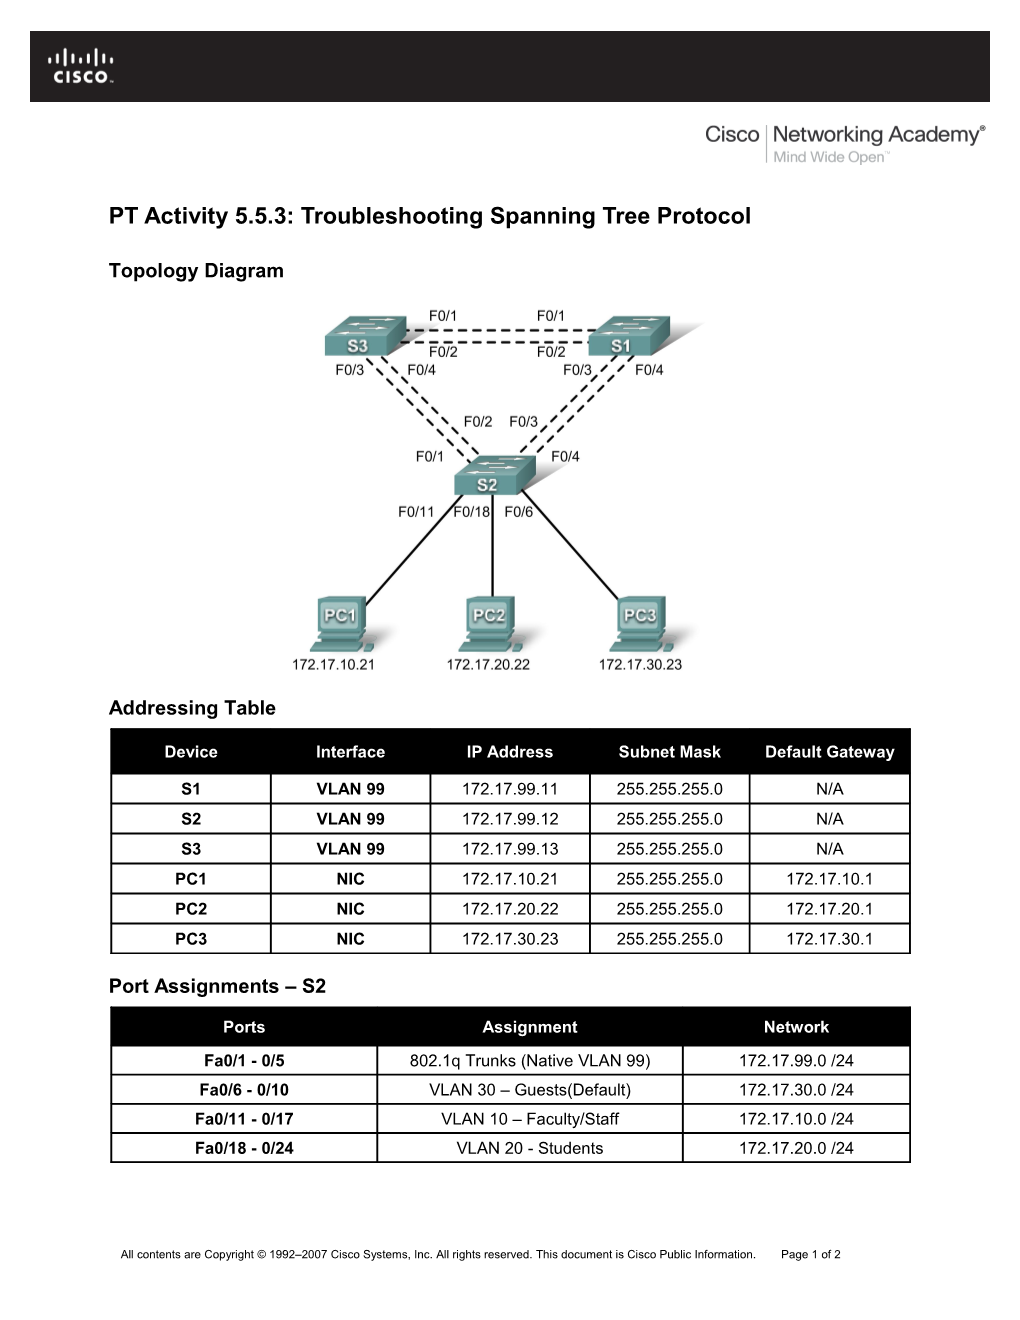 PT Activity 5.5.3: Troubleshooting Spanning Tree Protocol